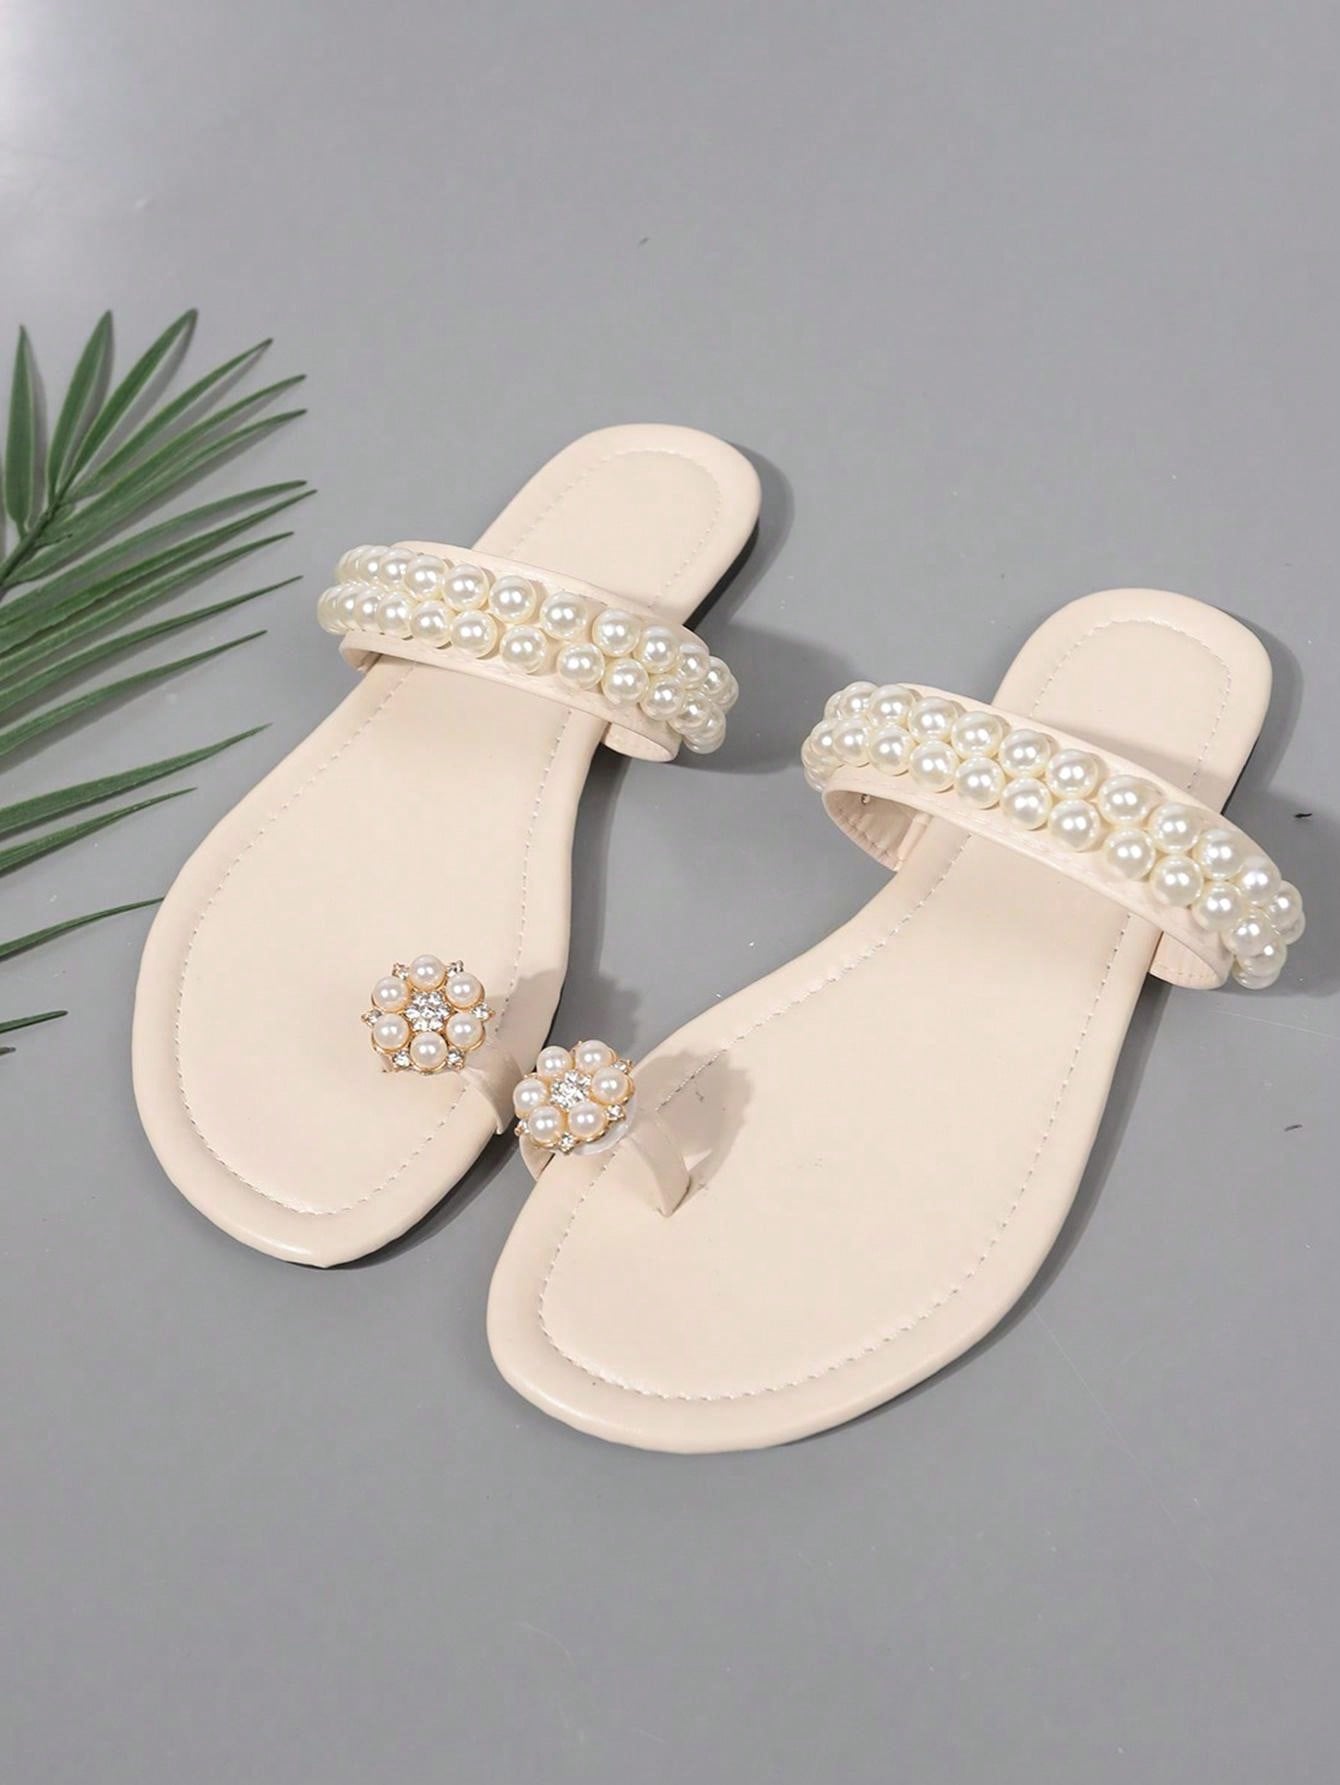 Women Flat Sandals With Pearl Rhinestone Decoration, Vacation Style Slip-On Slippers With Round Toe And Low Heel, Elegant Flat Slippers-Beige-7